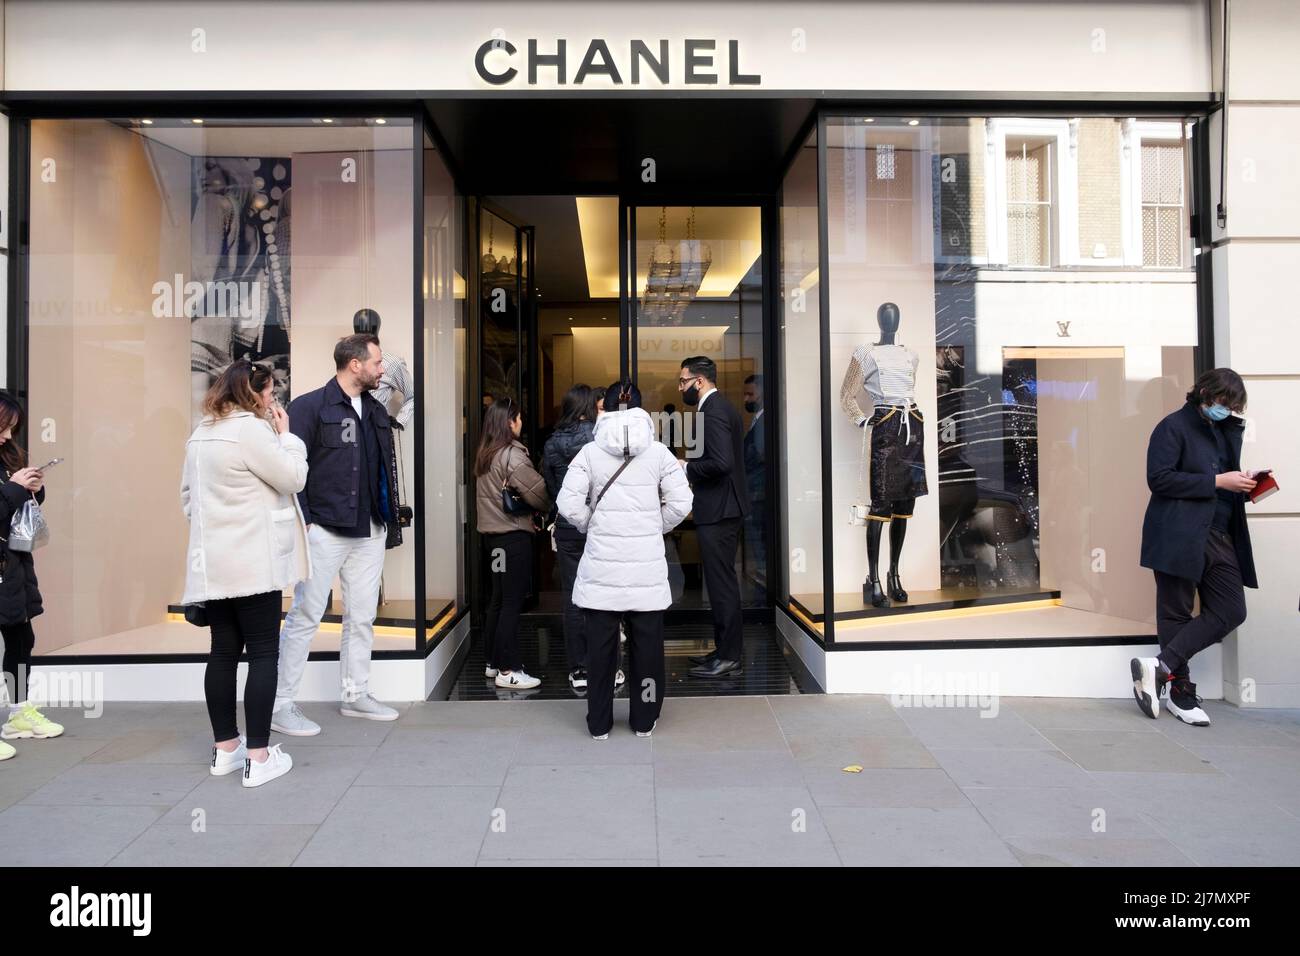 Outside chanel stock photography and - Alamy